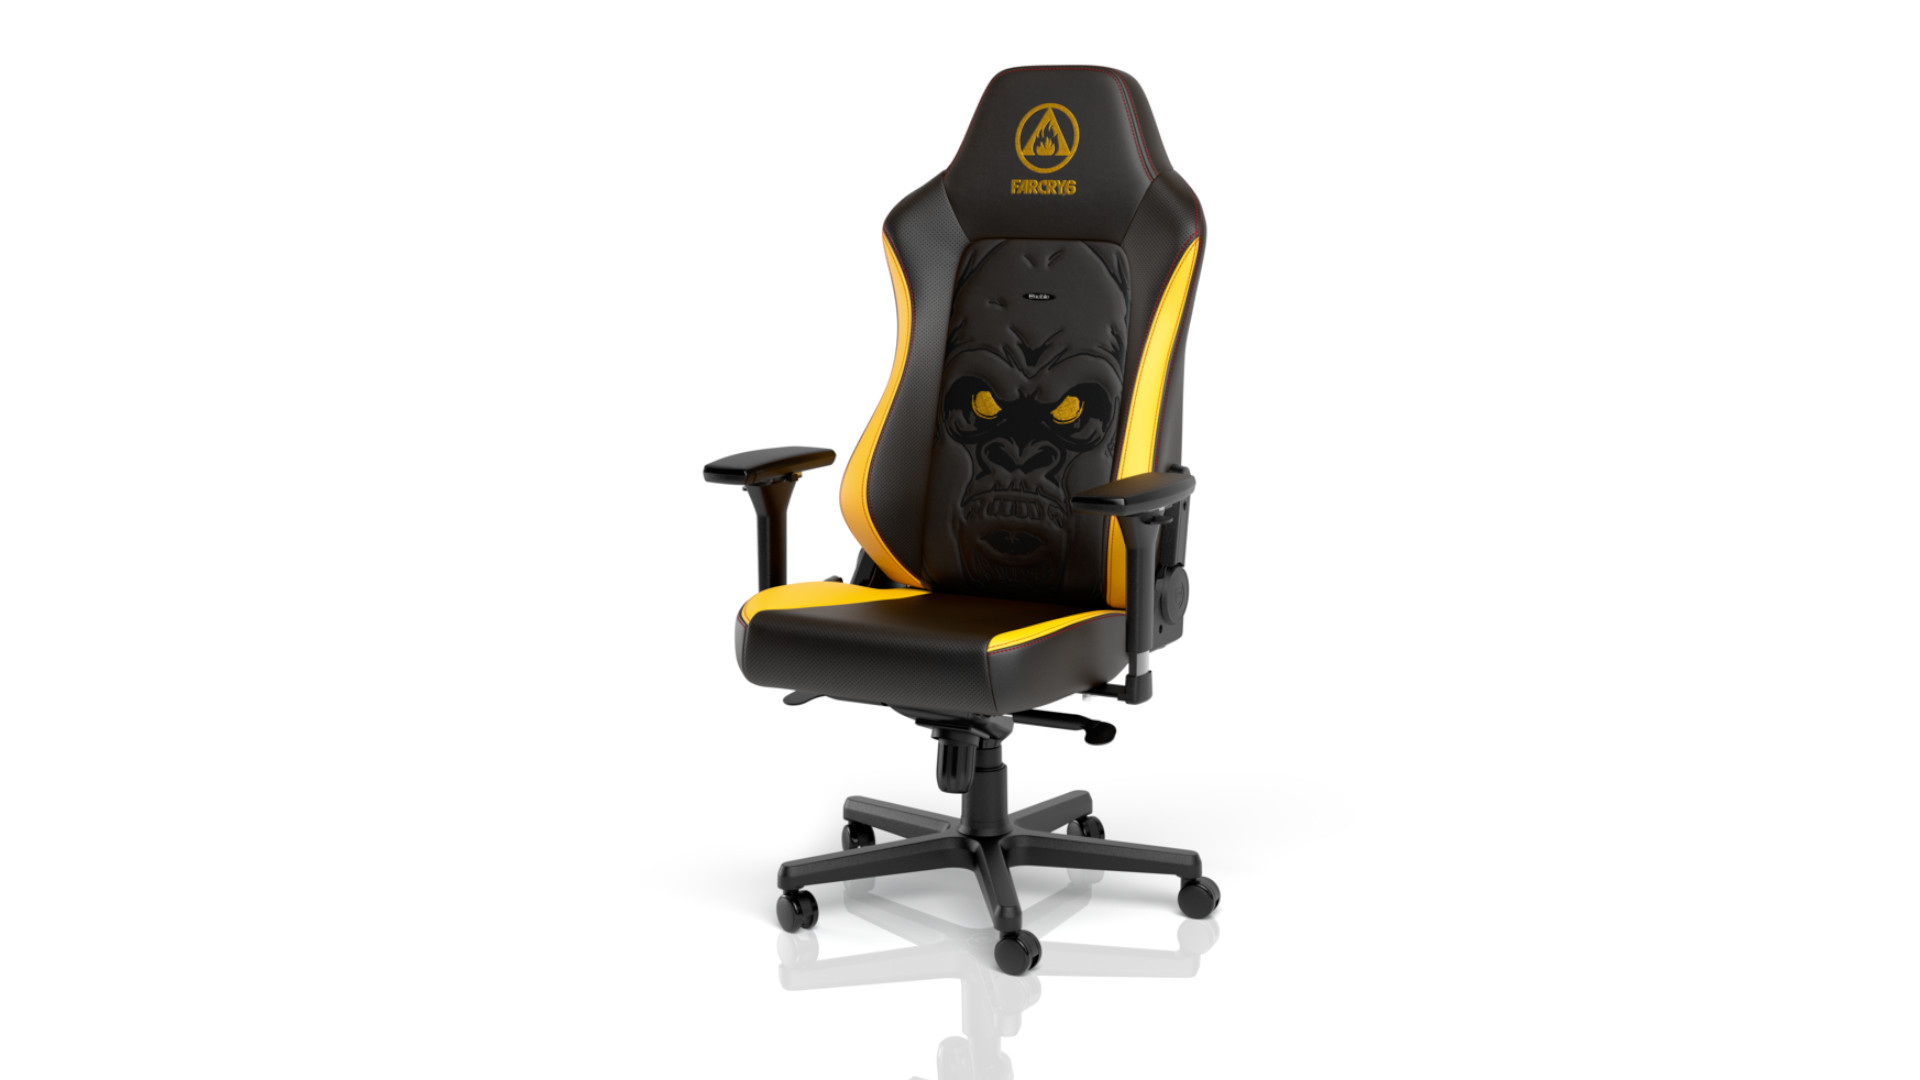 Accessories  noblechairs